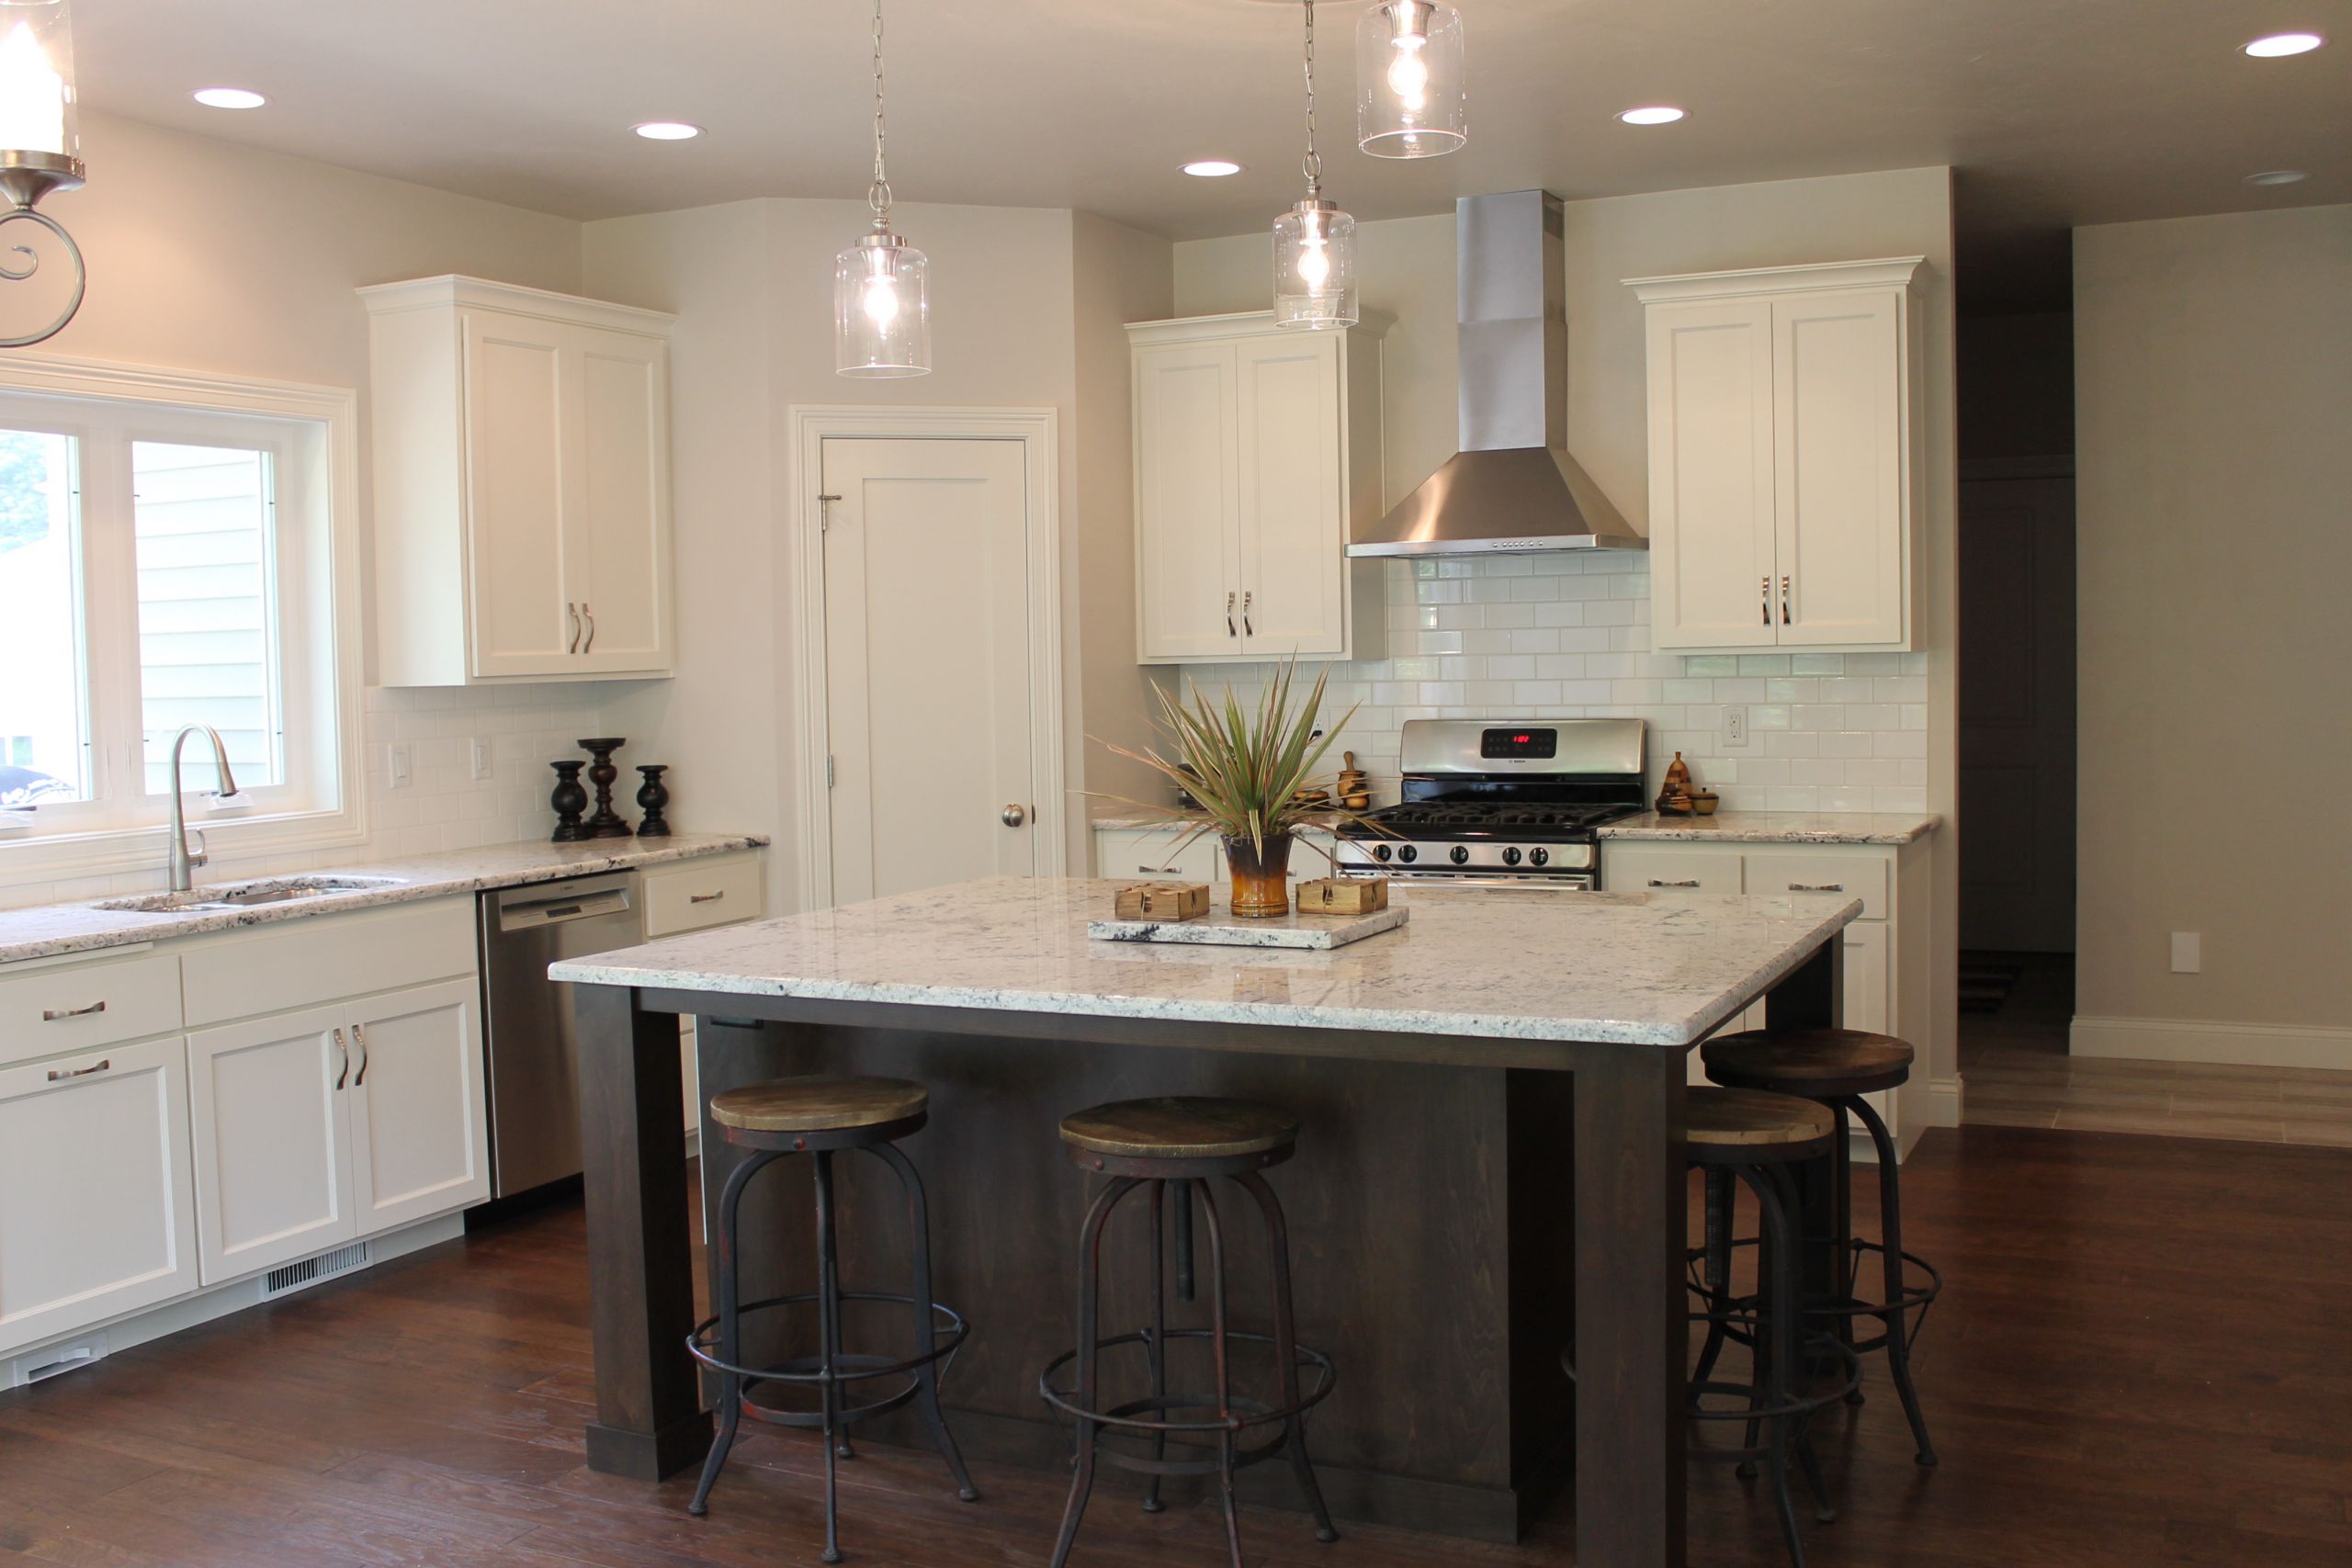 Kitchen Cabinets And Islands
 The Best of White Cabinets – Katie Jane Interiors